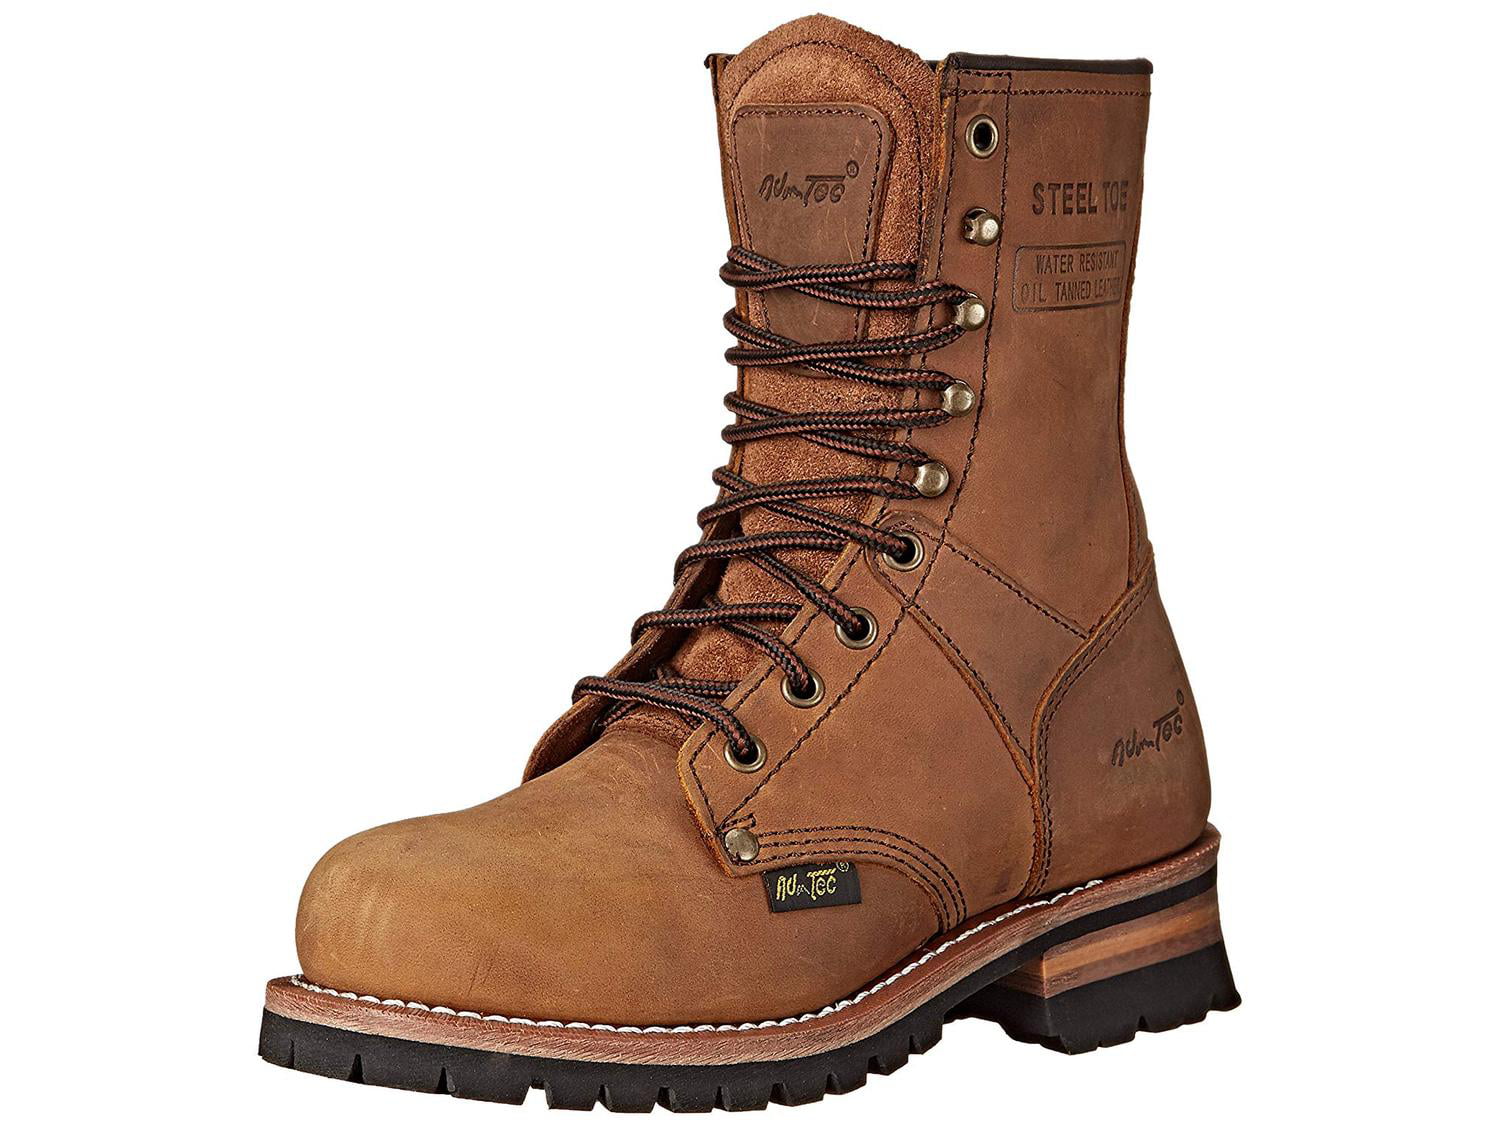 Adtec Womens Work Boots 9 Steel Toe Logger Brown, Numeric_7_Point_5 